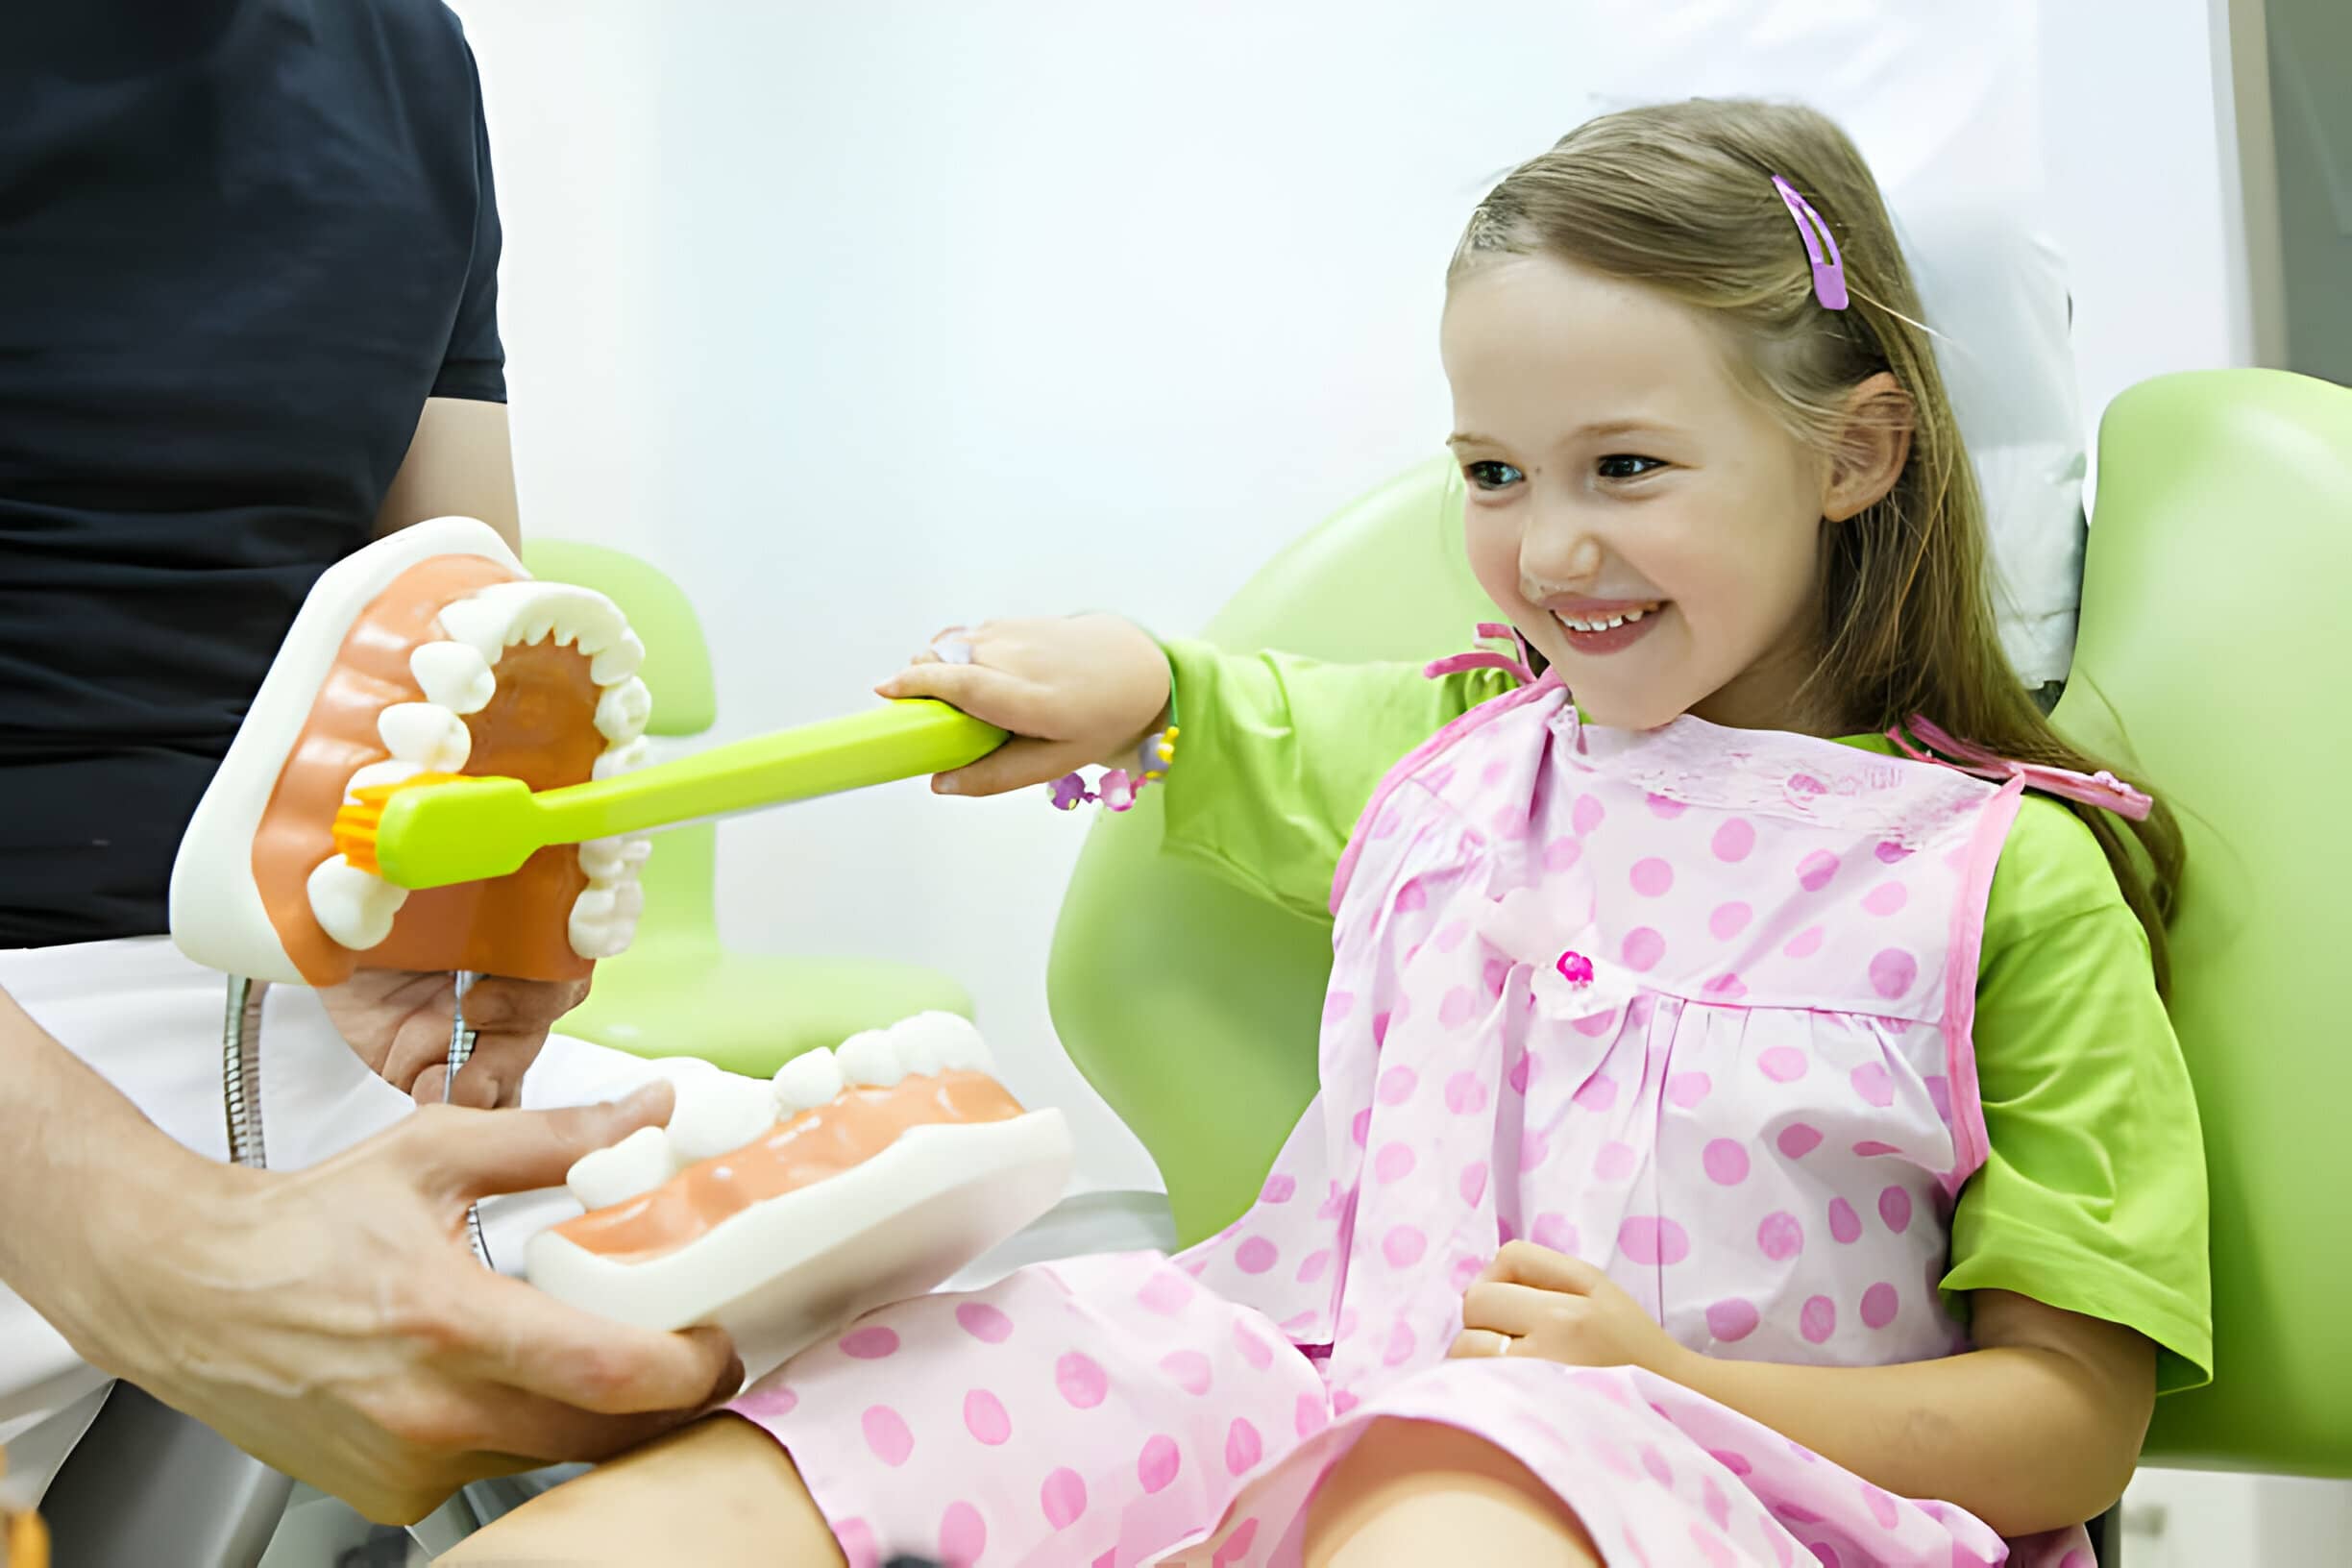 When Should A Child Start Going To The Dentist?